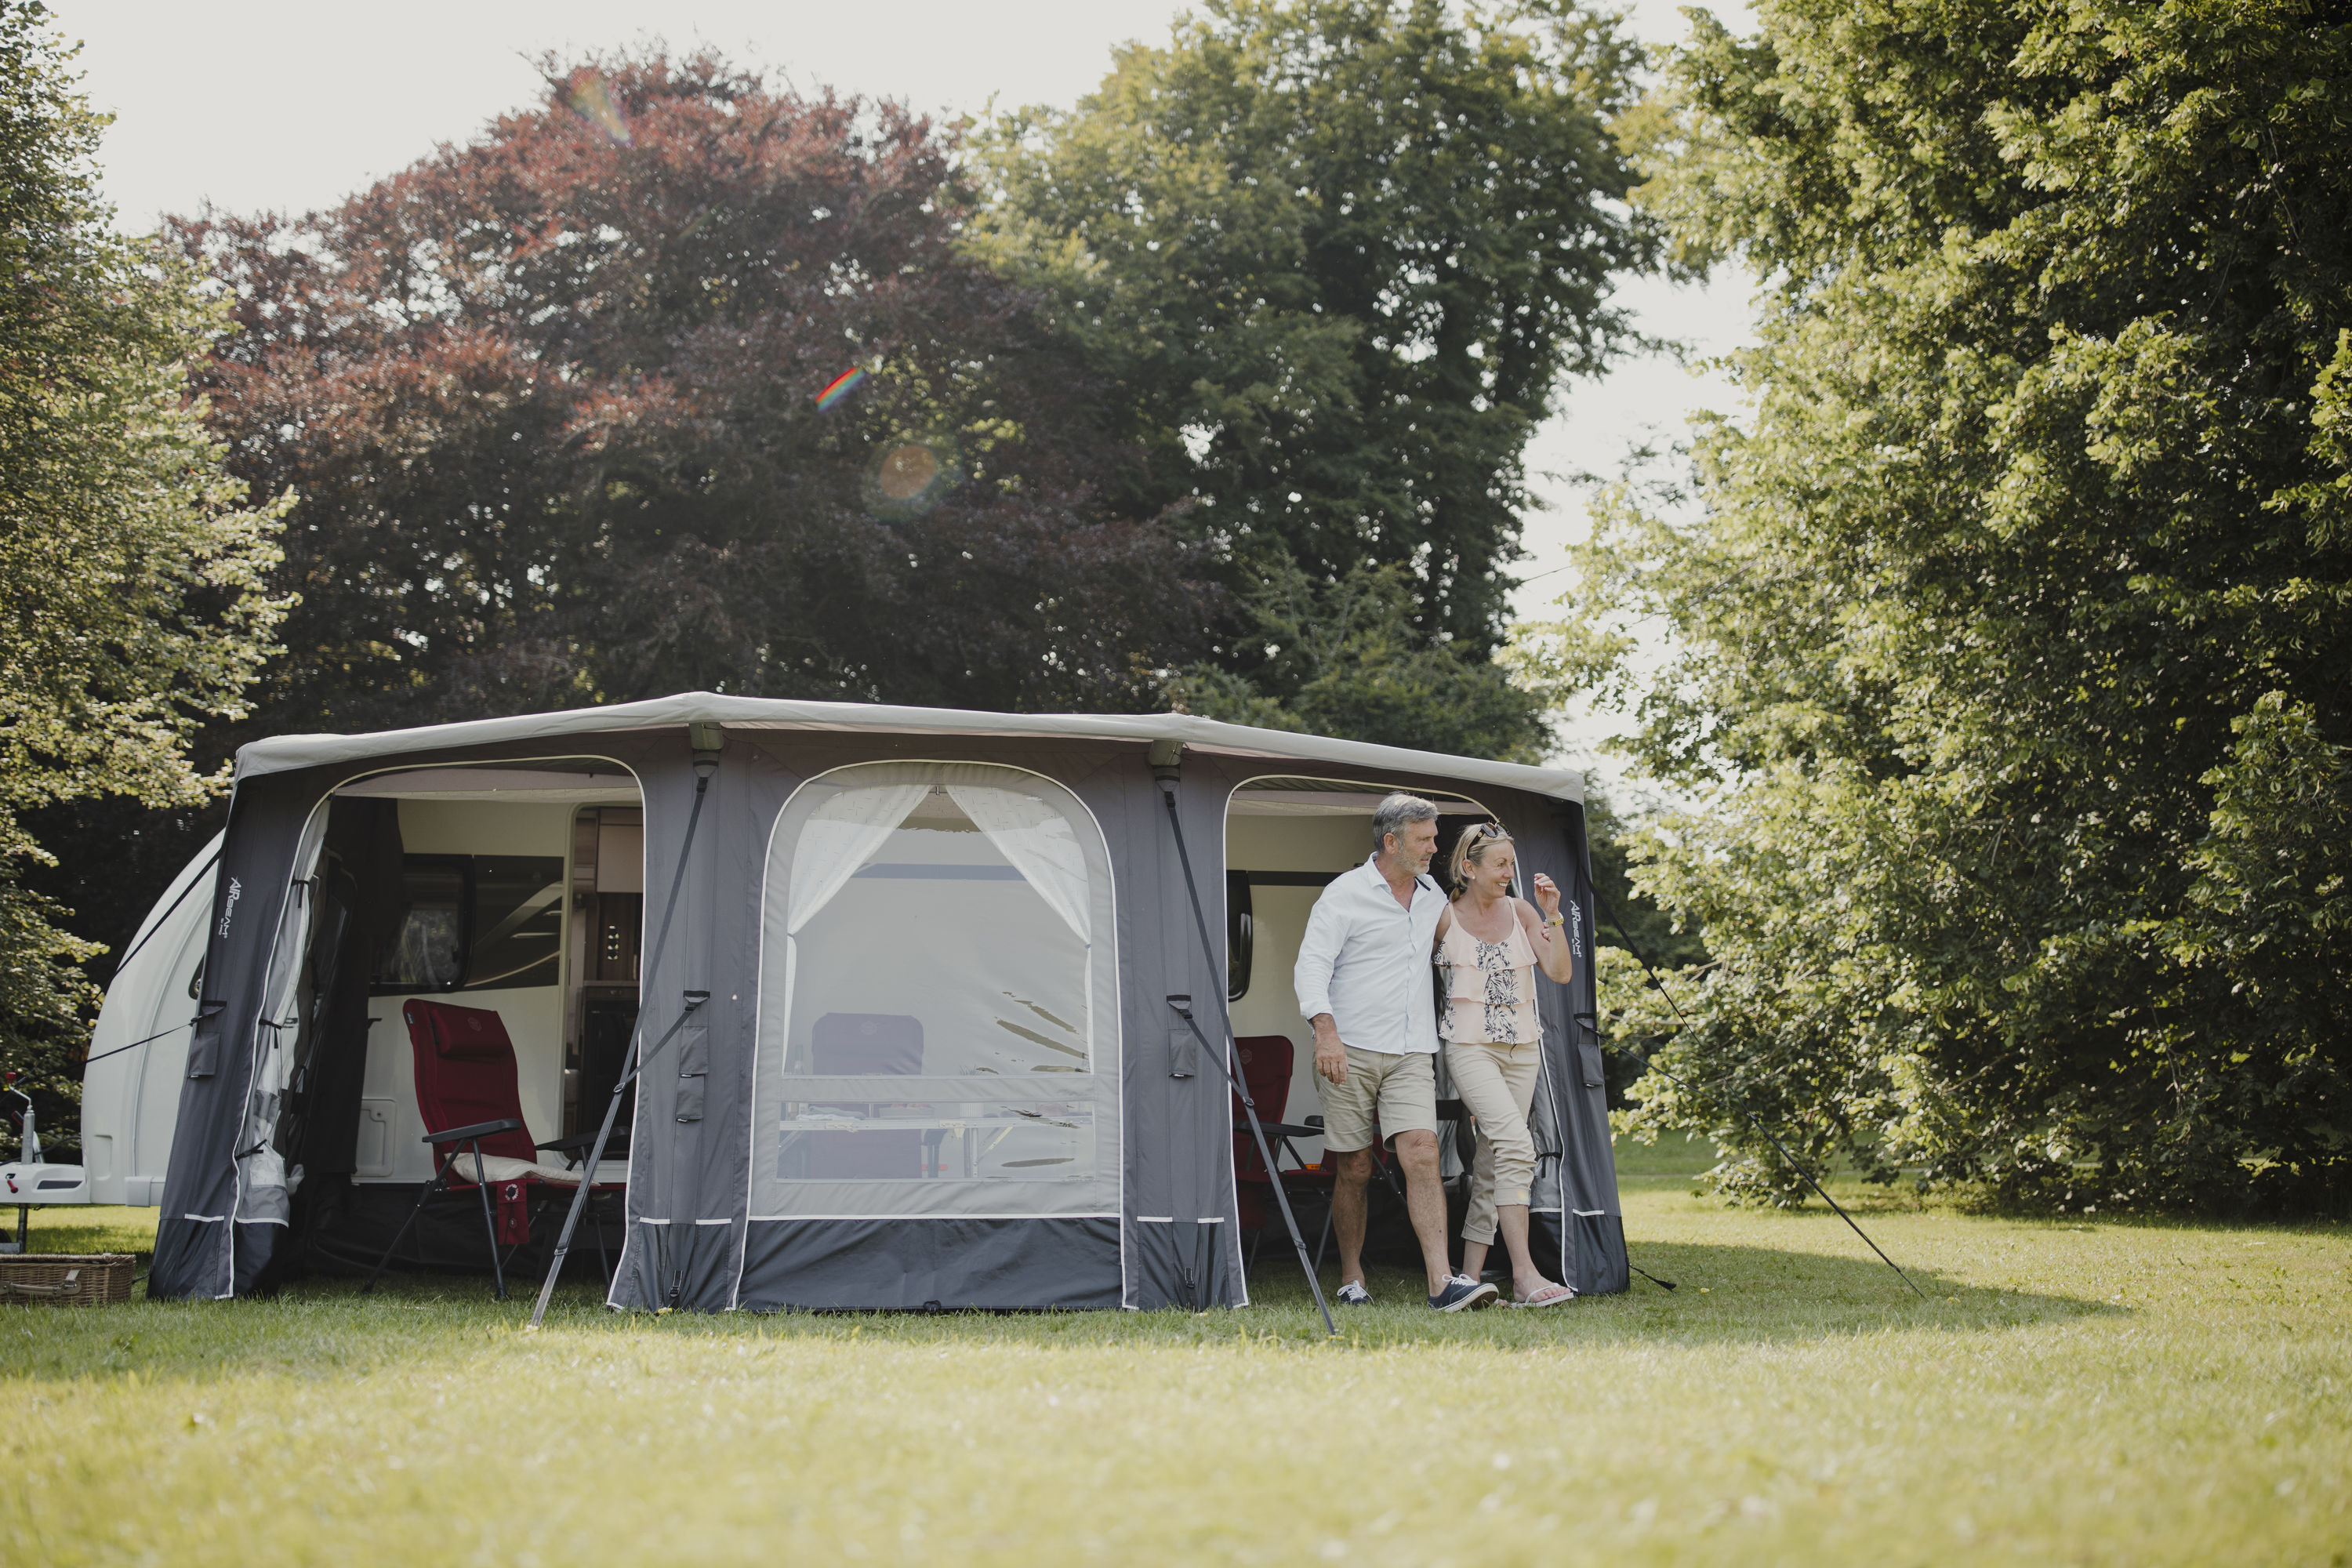 The Vango Tuscany Caravan awning is our choice for 2022!